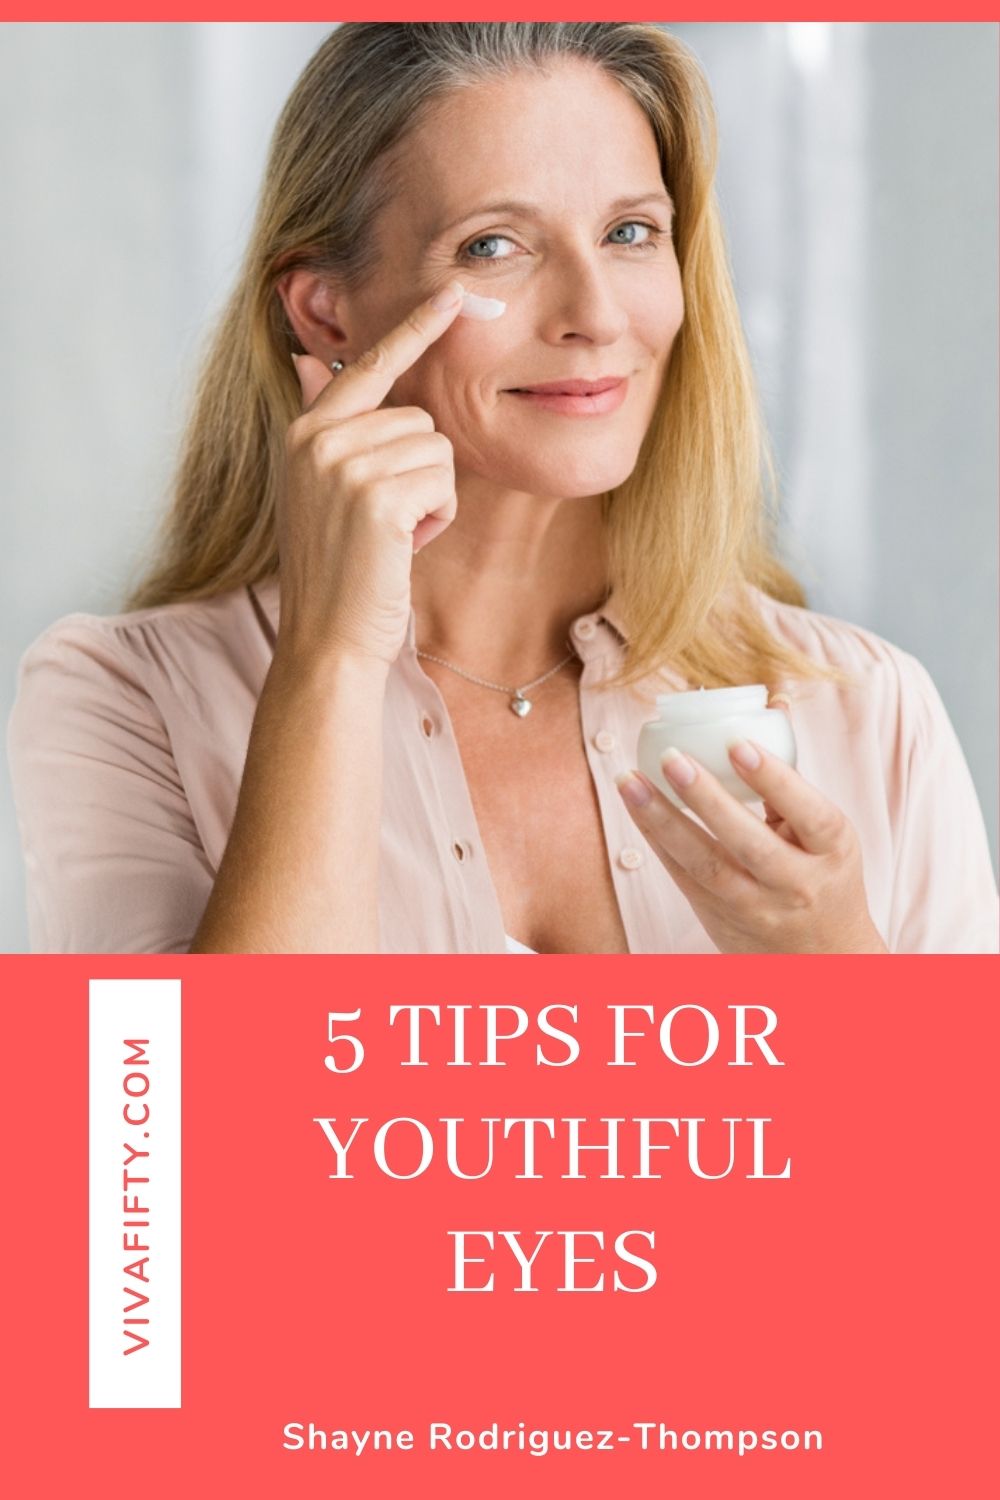 The eyes are quick to show signs of aging and fatigue. Here are some things you can do to have youthful eyes.